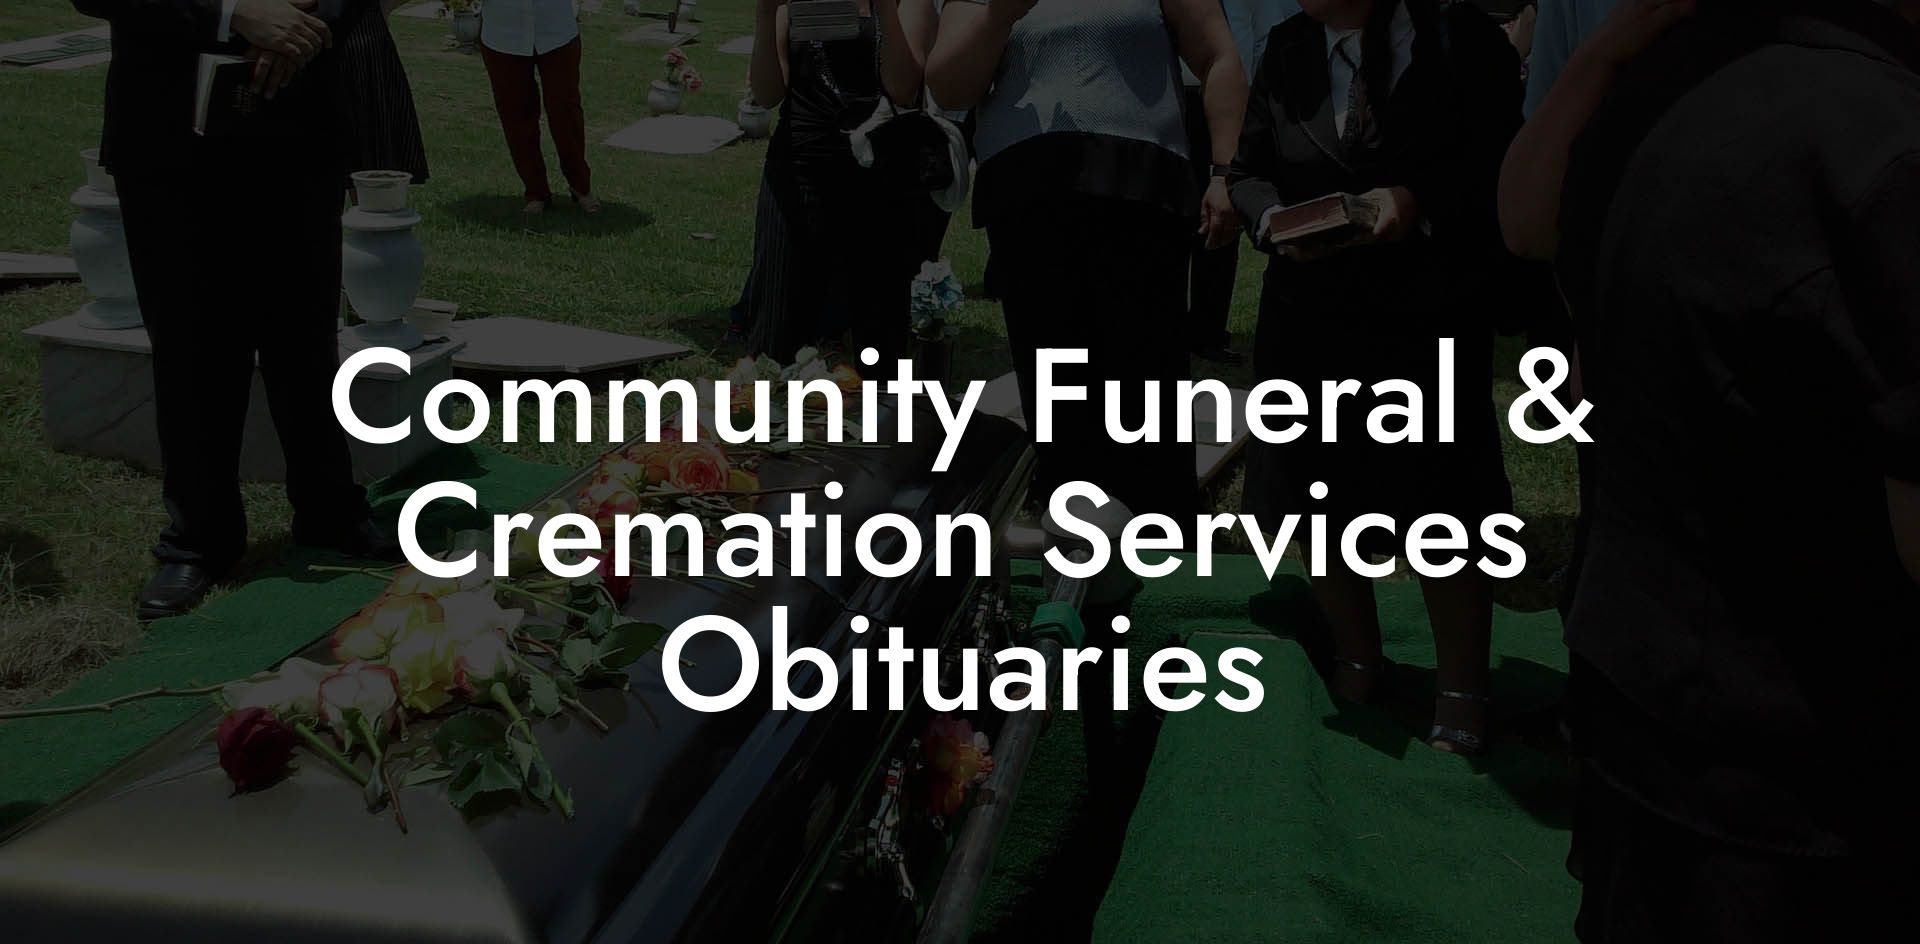 Community Funeral & Cremation Services Obituaries